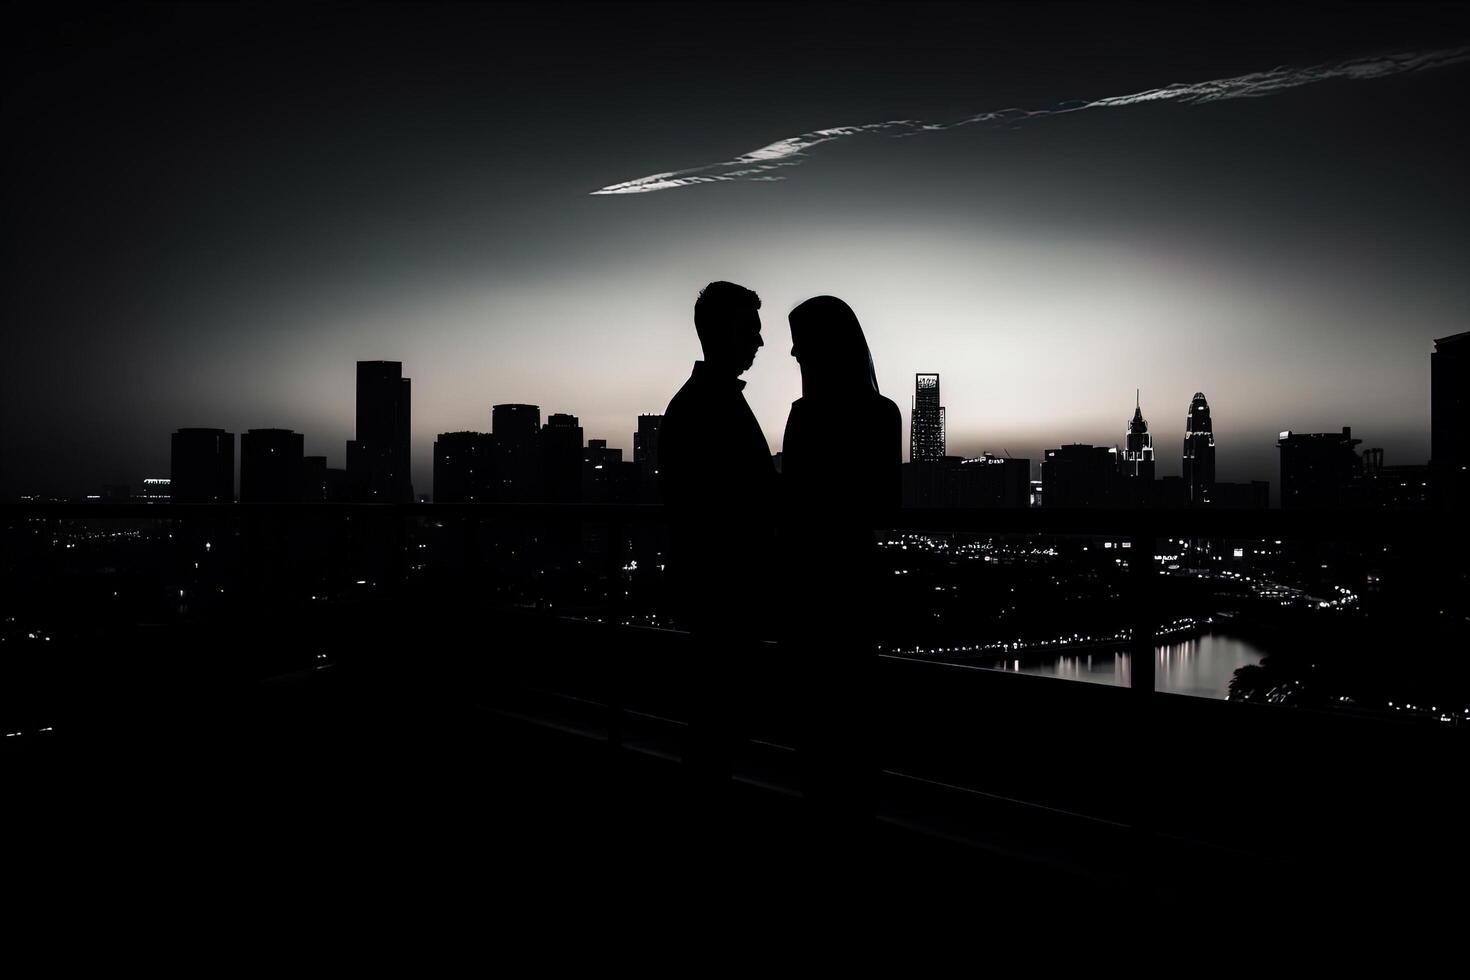 Silhouette of a romantic young couple enjoying the city nightscape. photo